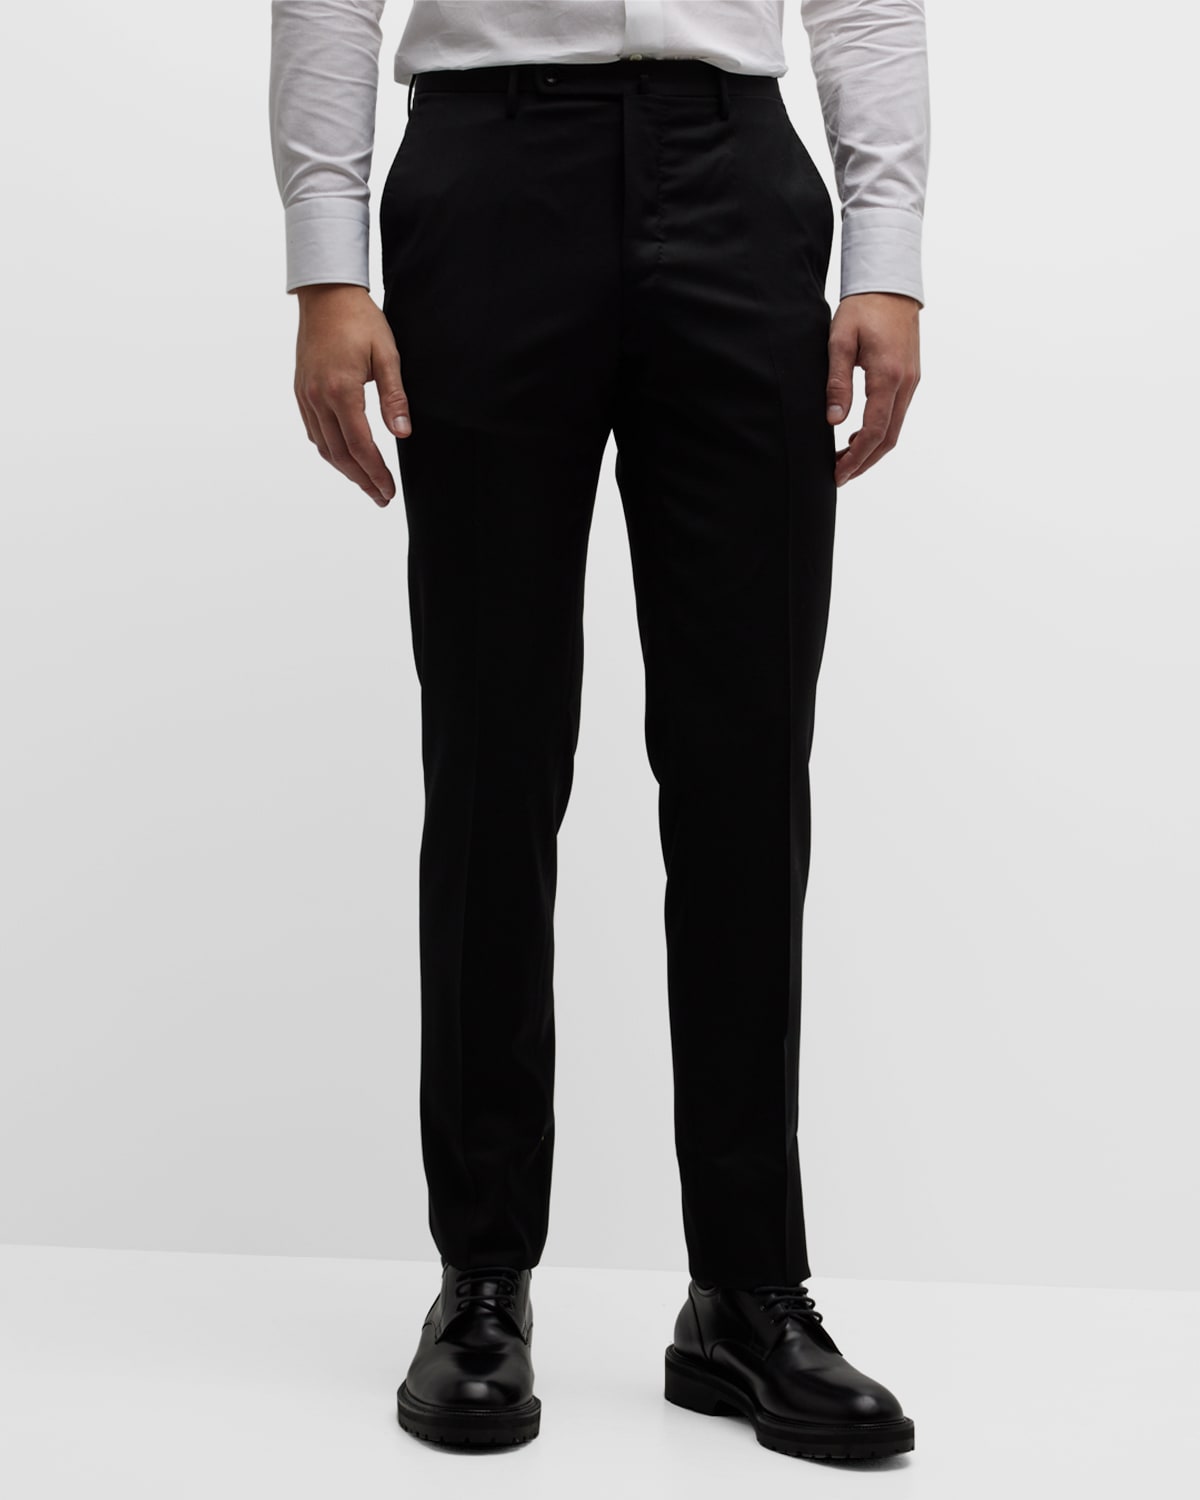 Men's Solid Stretch Wool Pants